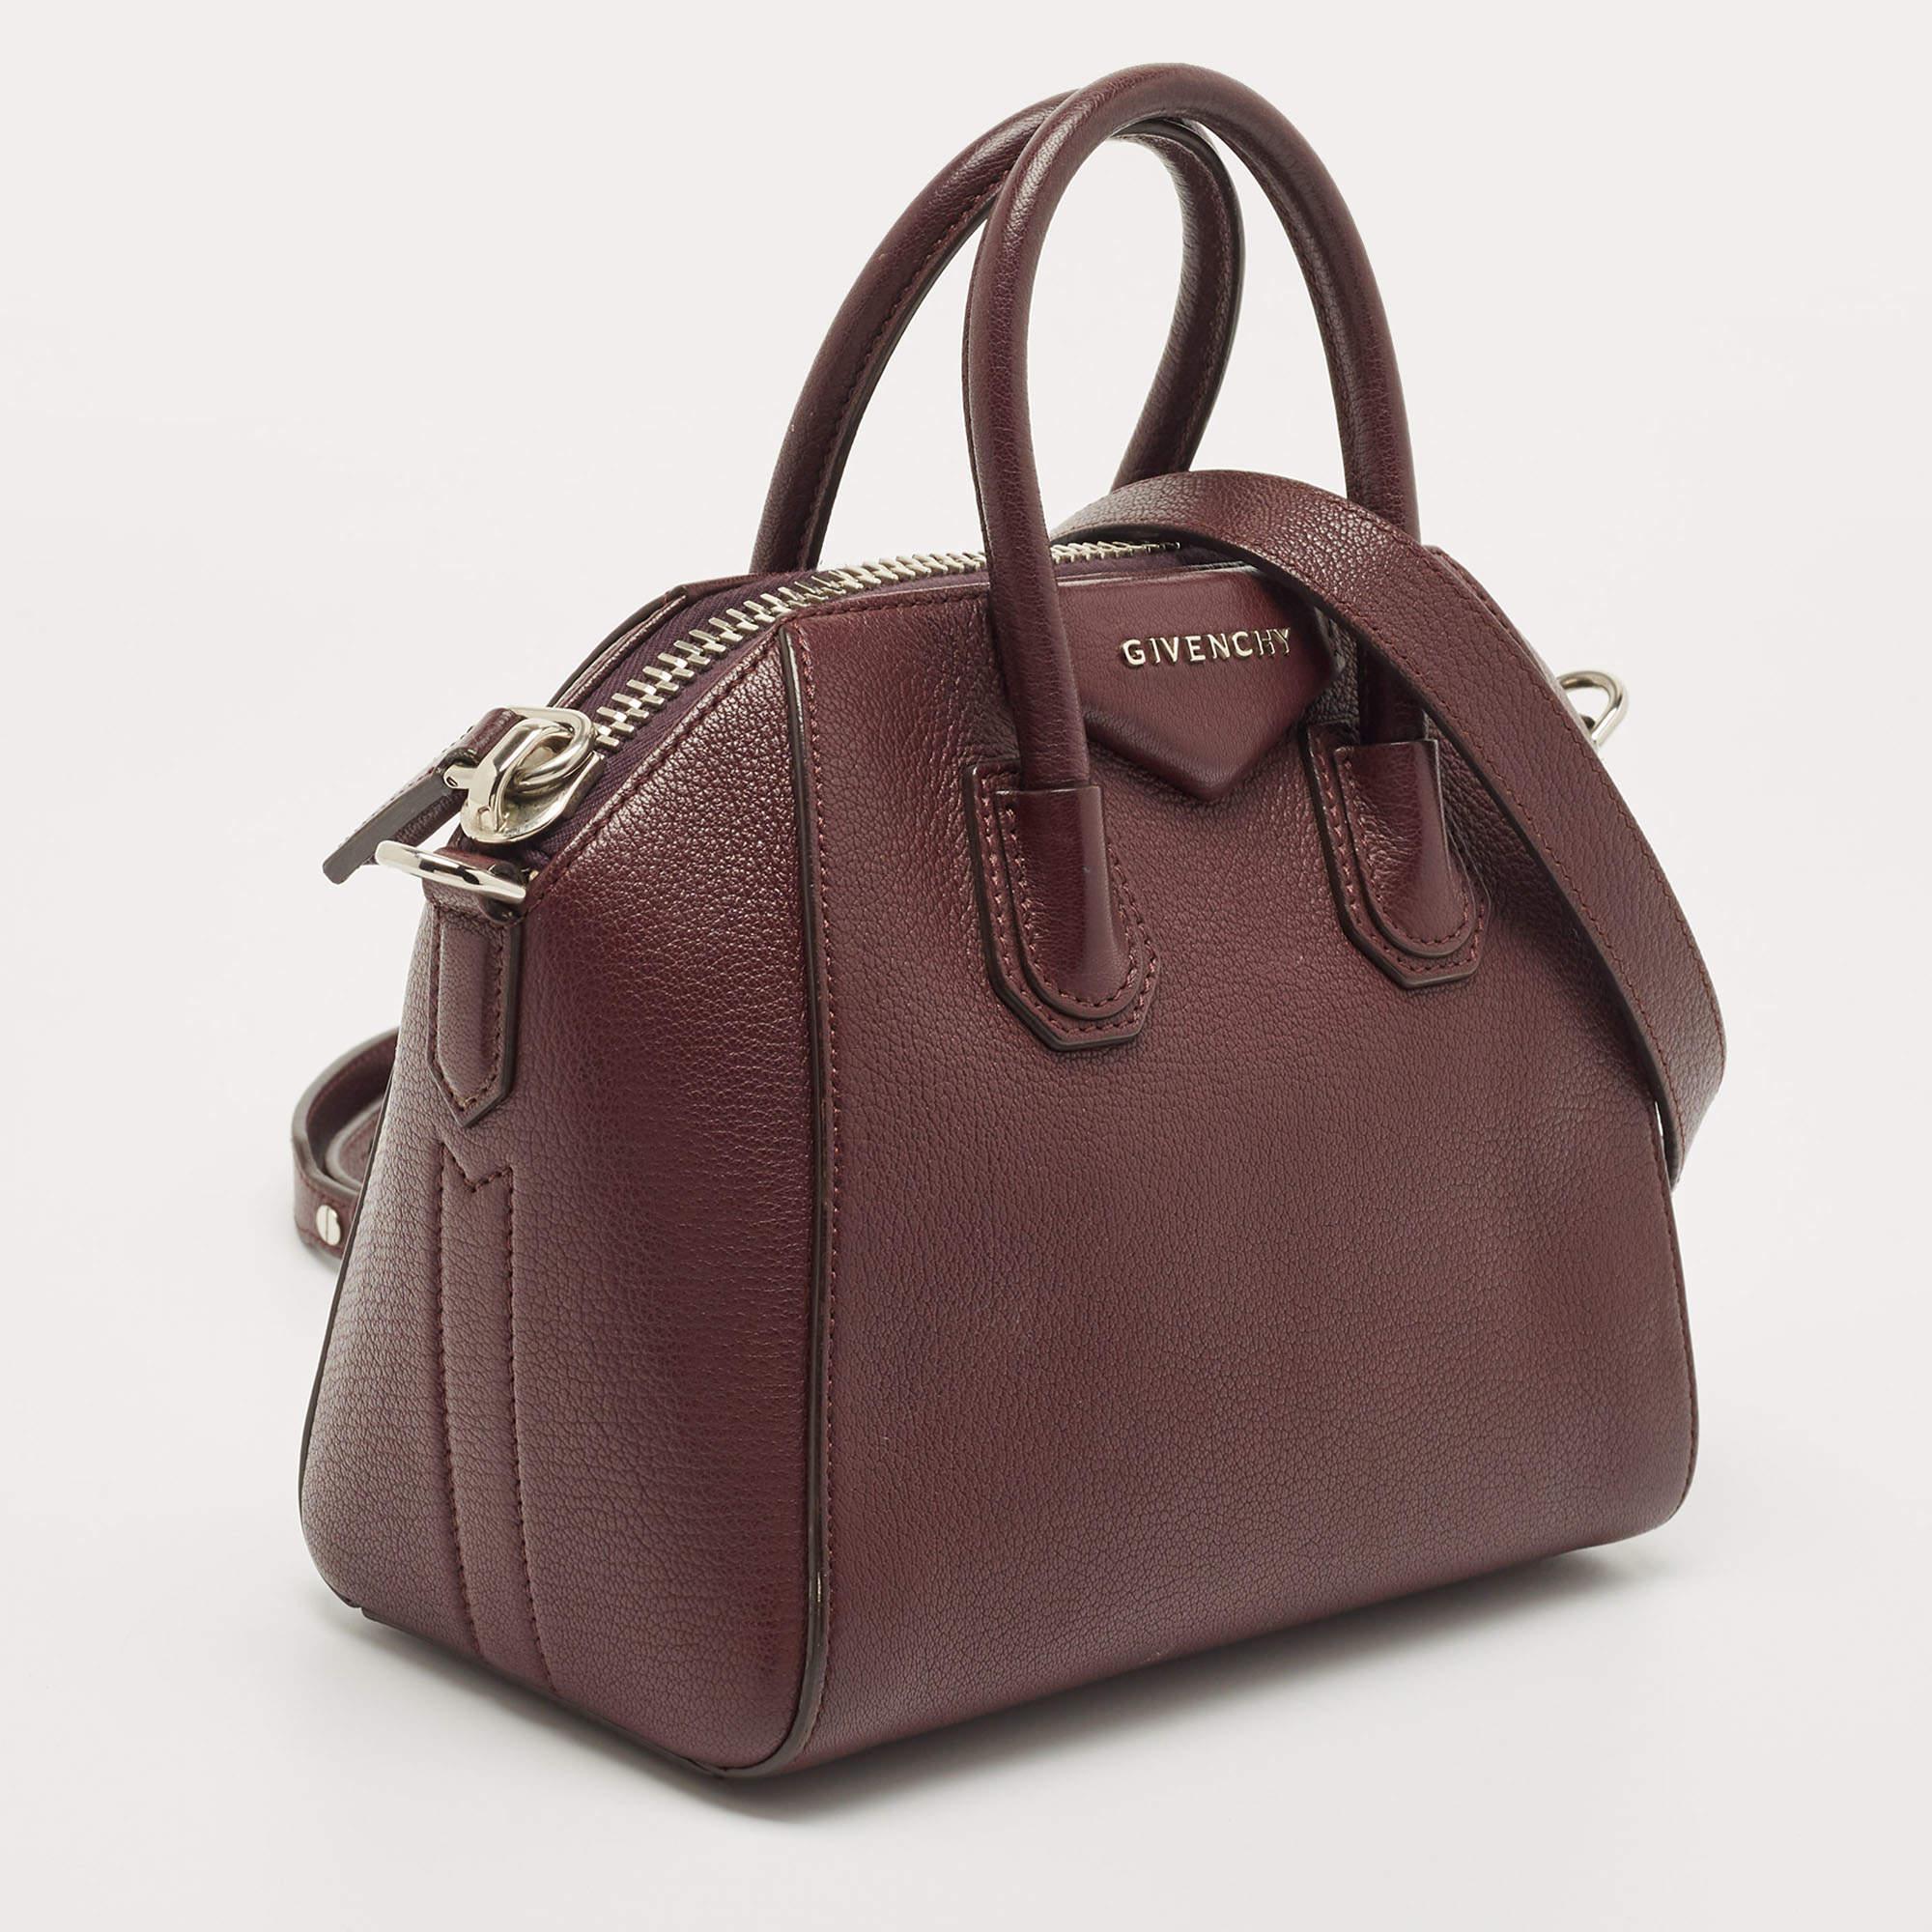 This authentic Givenchy satchel is rendered in the finest quality materials into an elegant design. Versatile and functional, this carryall is well-sized for your daily use.

